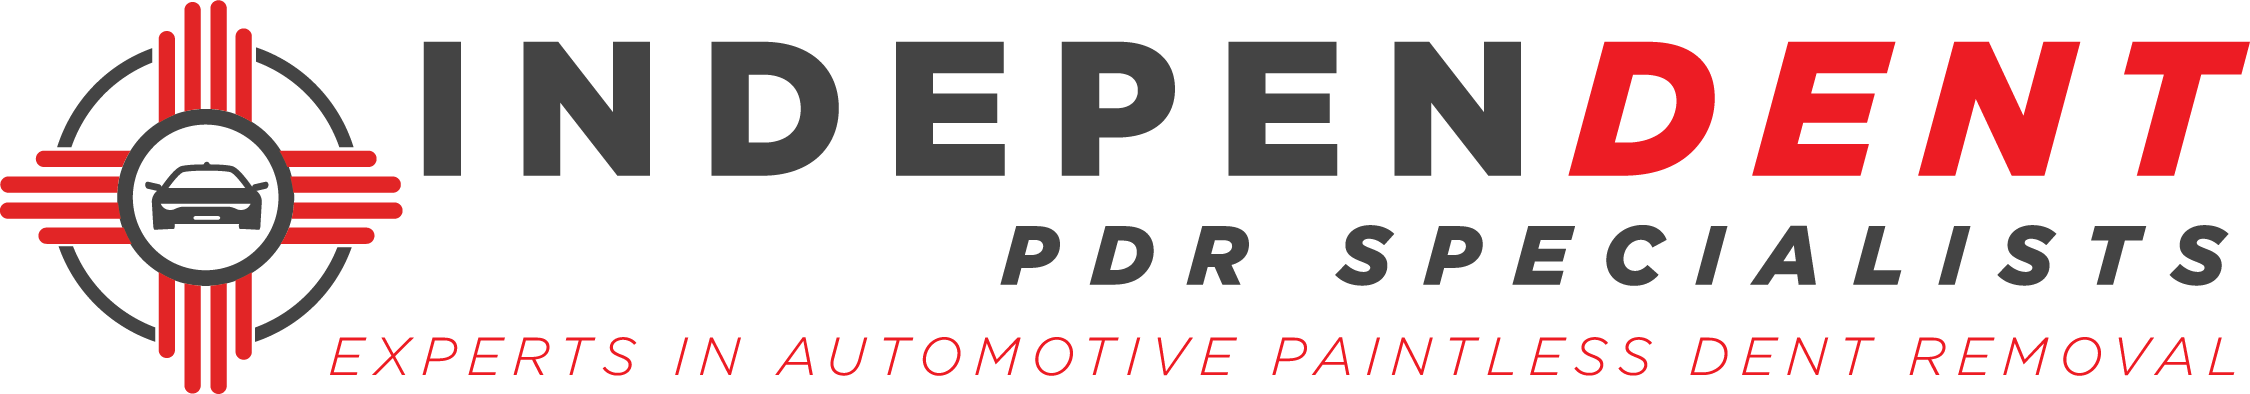 IndepenDent PDR Specialists